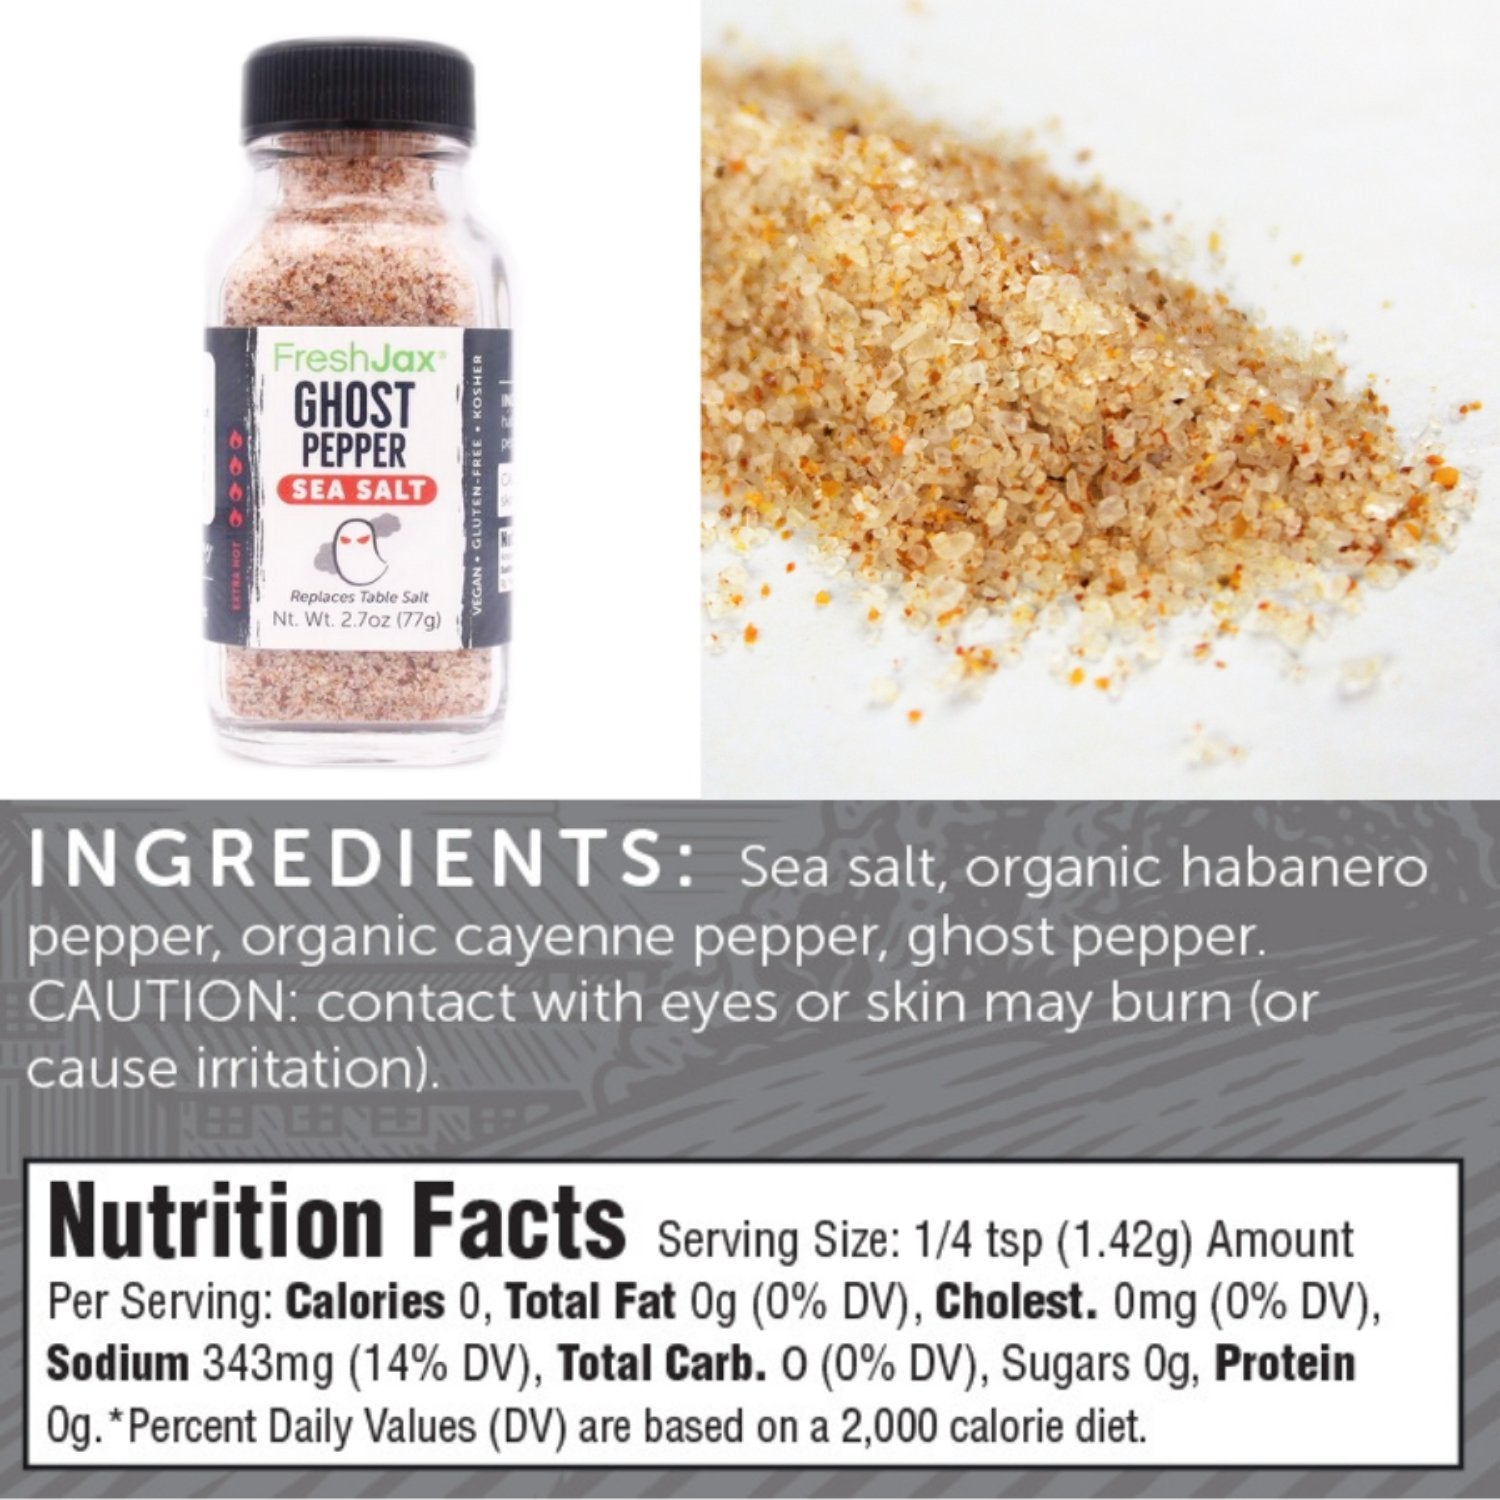 FreshJax Organic Spices Ghost Pepper Sea Salt Ingredients and Nutritional Information